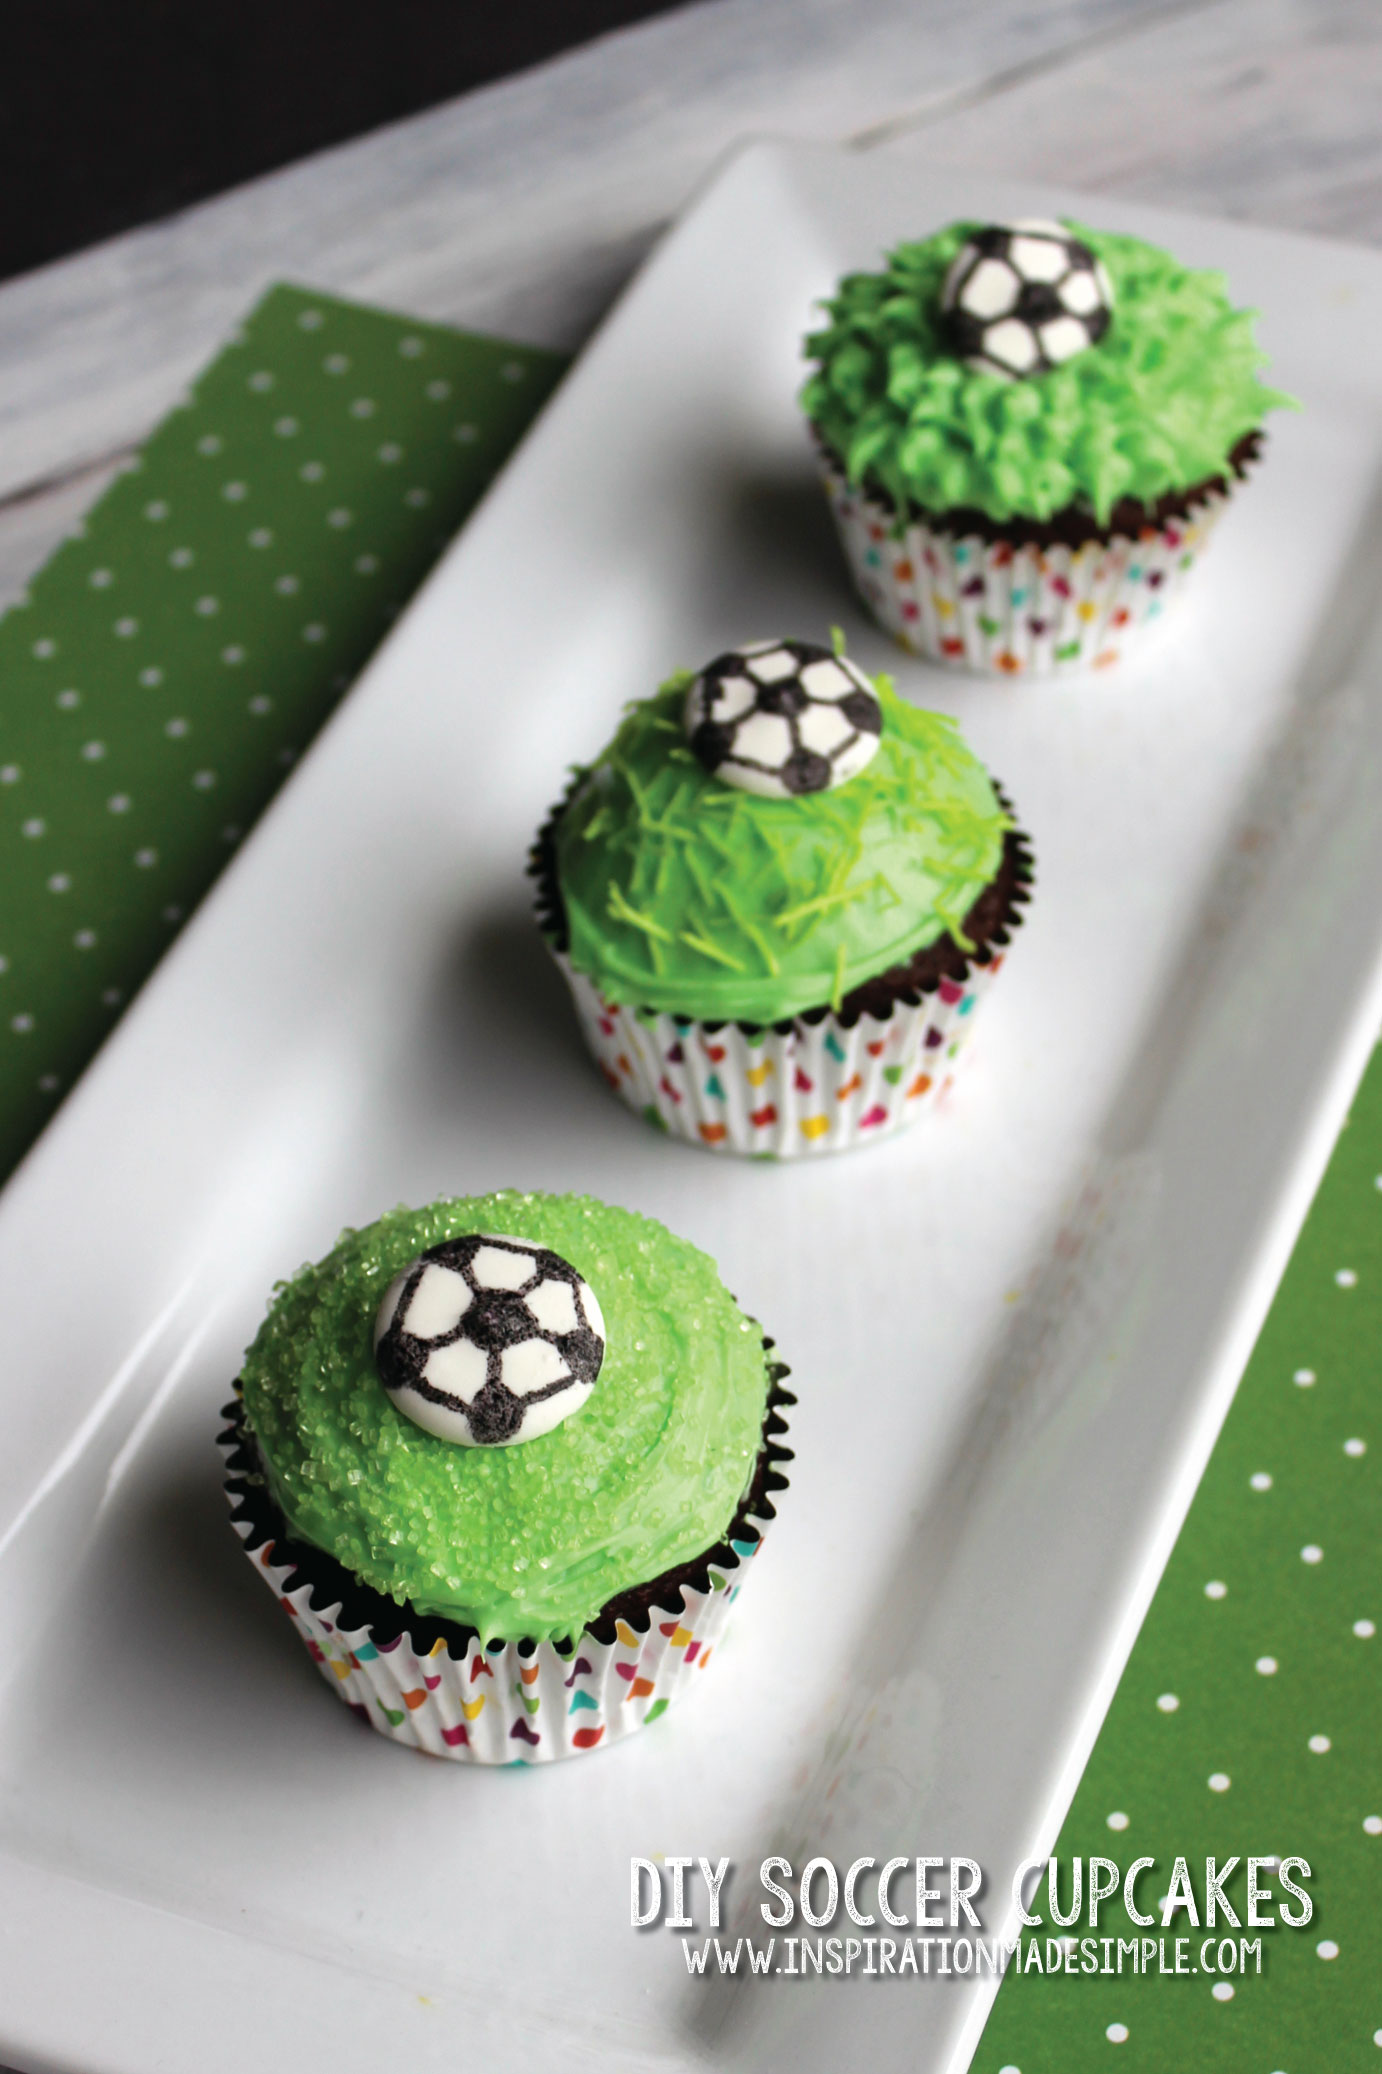 DIY Soccer Cupcakes with Candy Melt Soccer Balls